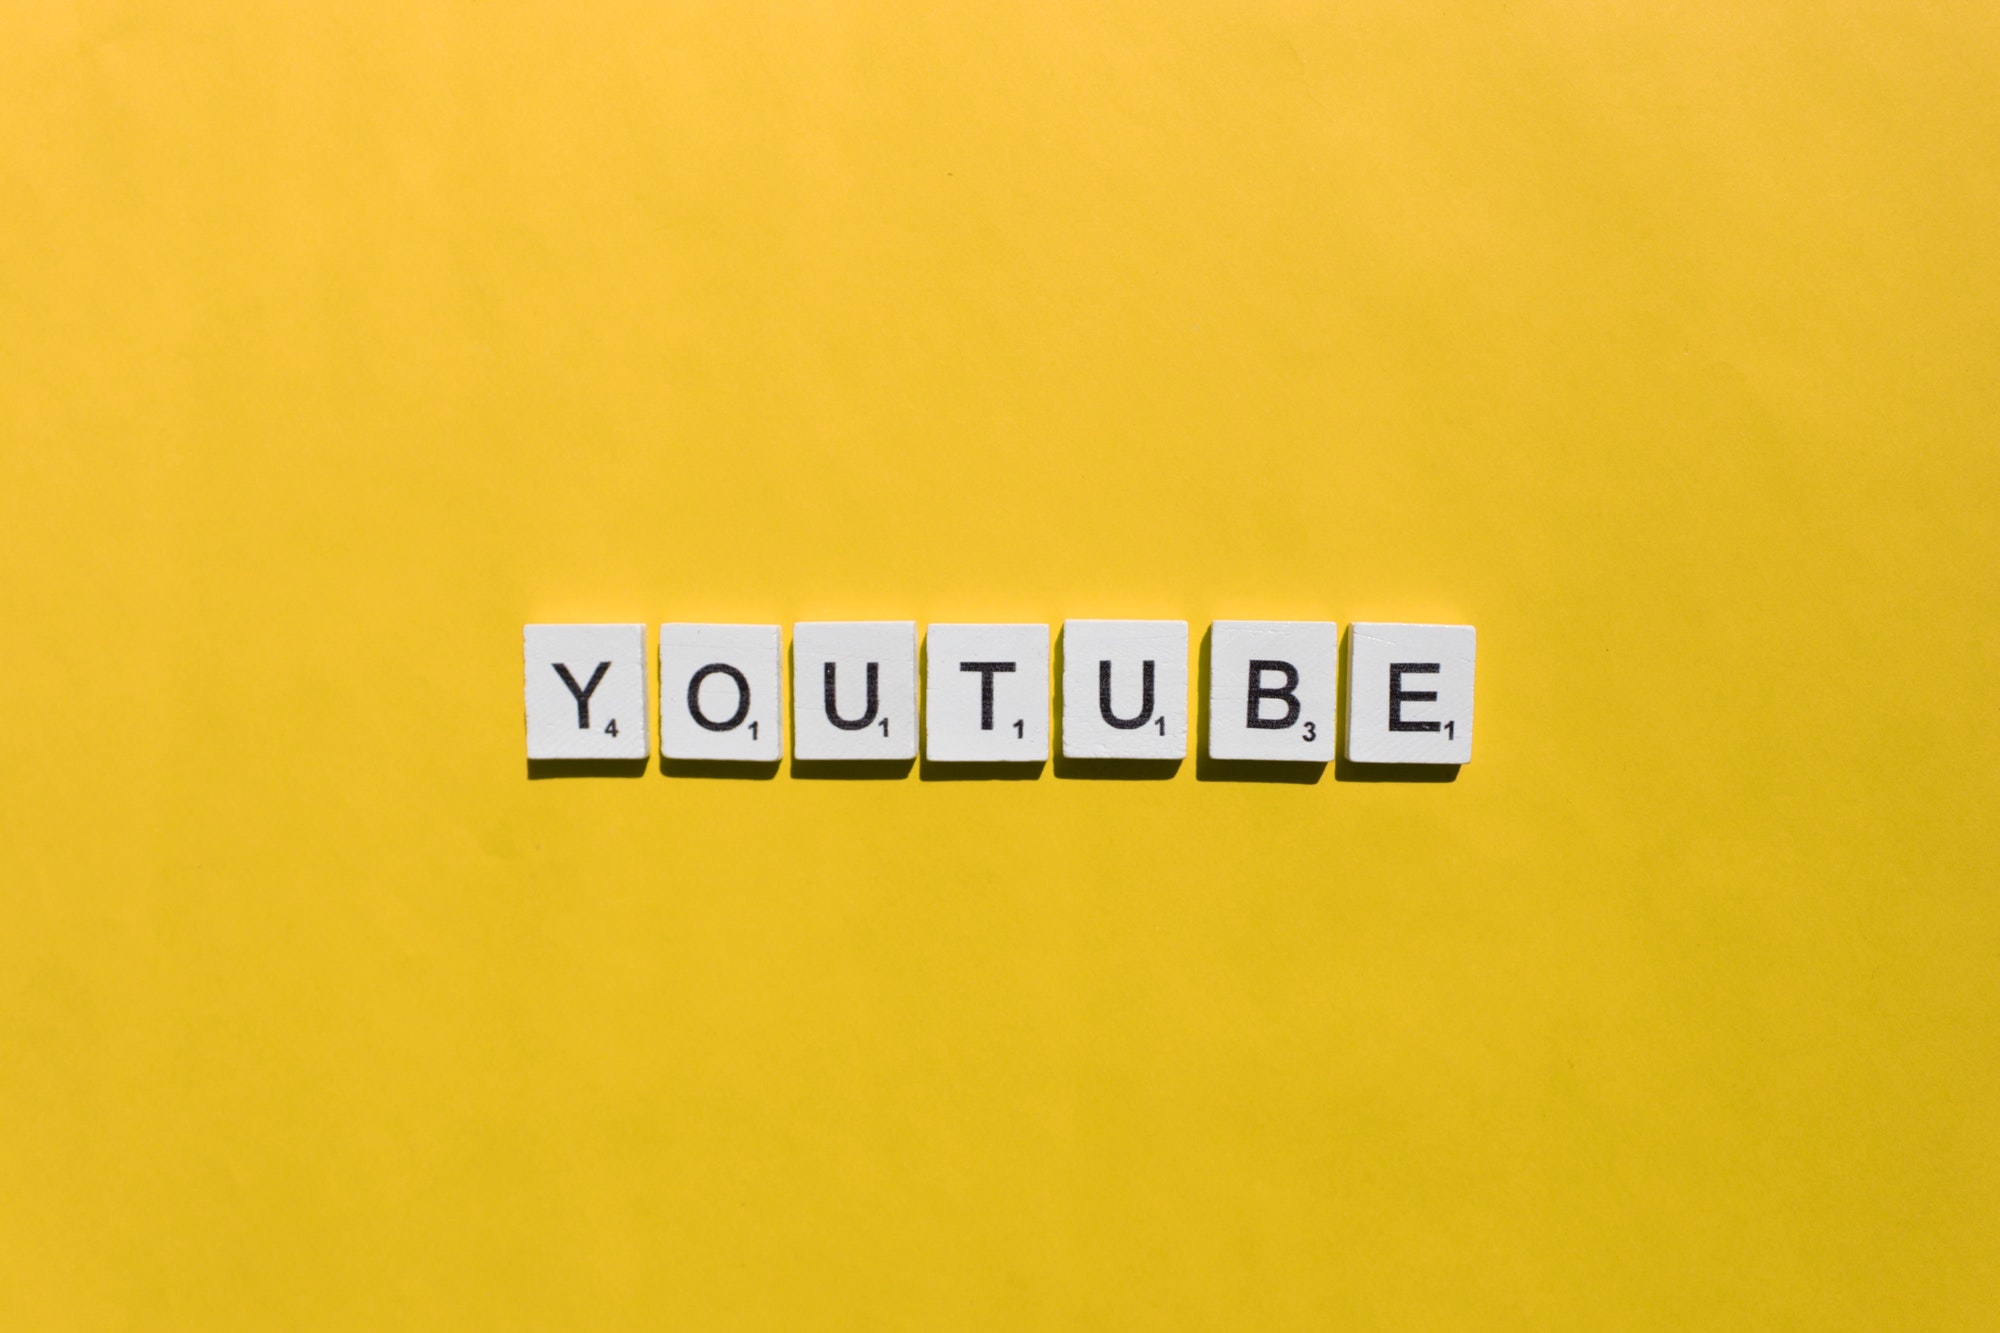 YouTube scrabble letters word on a yellow background